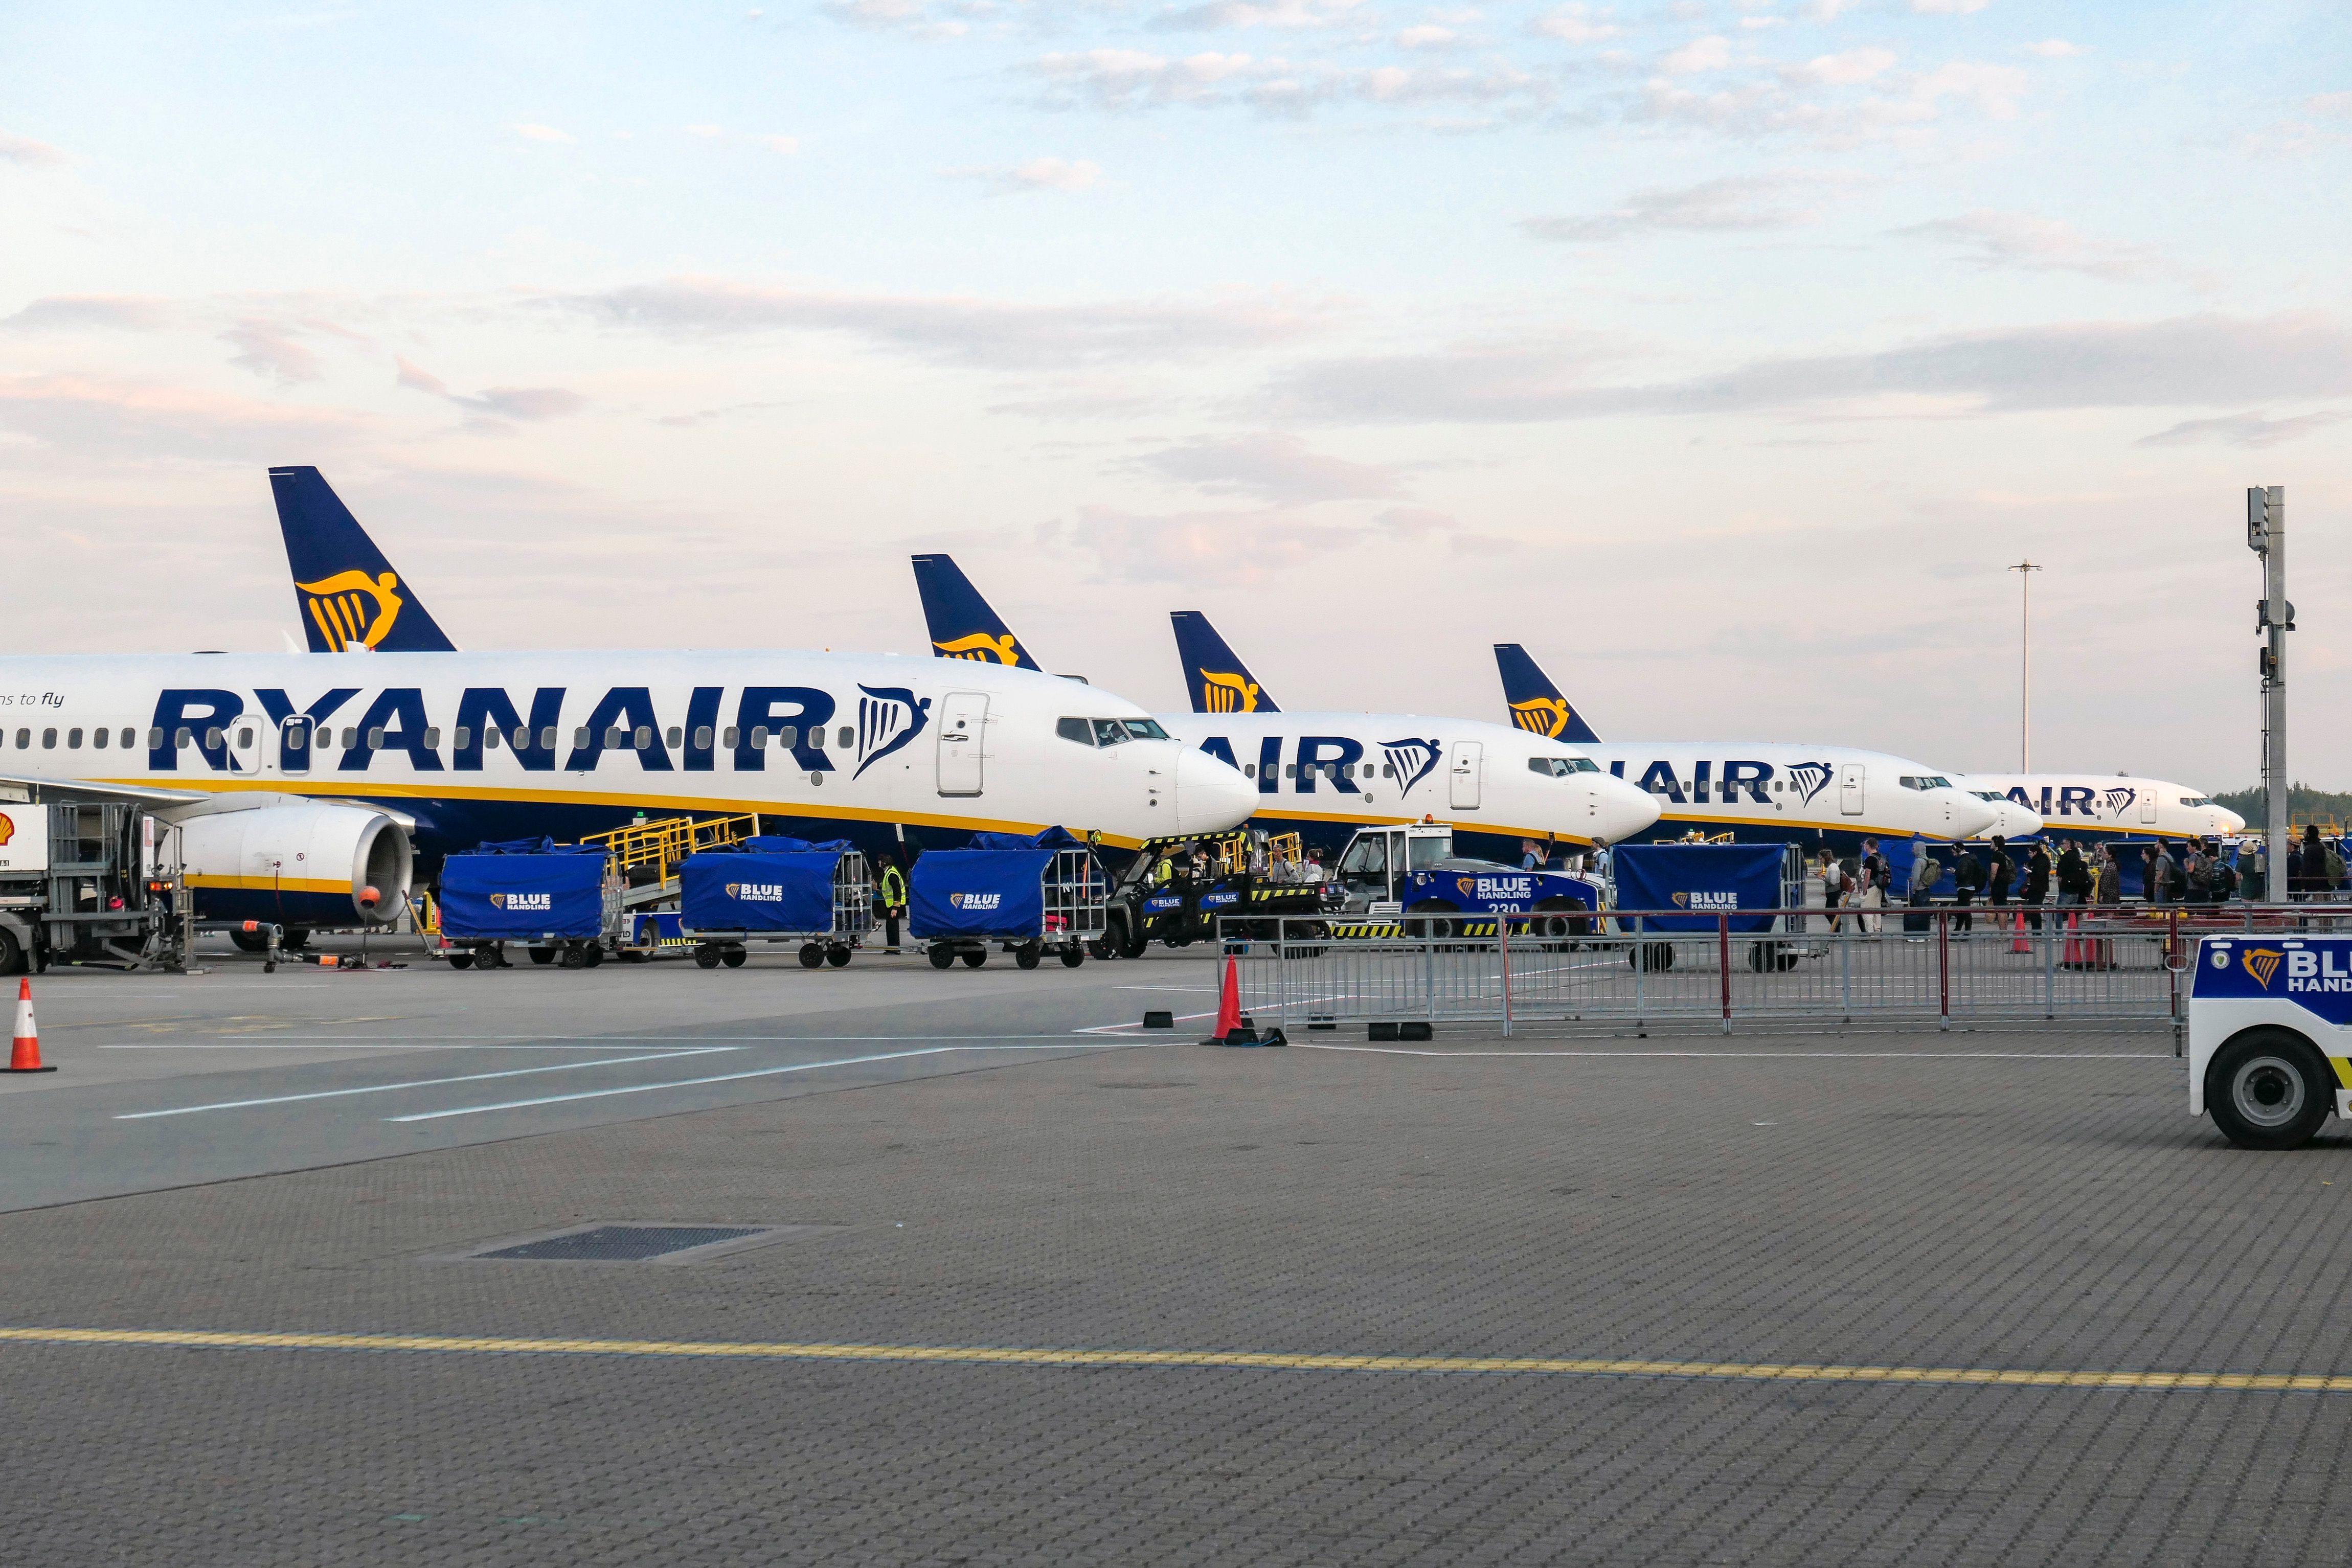 Ryanair Boeing 737-800s on the tarmac at London Stansted Airport